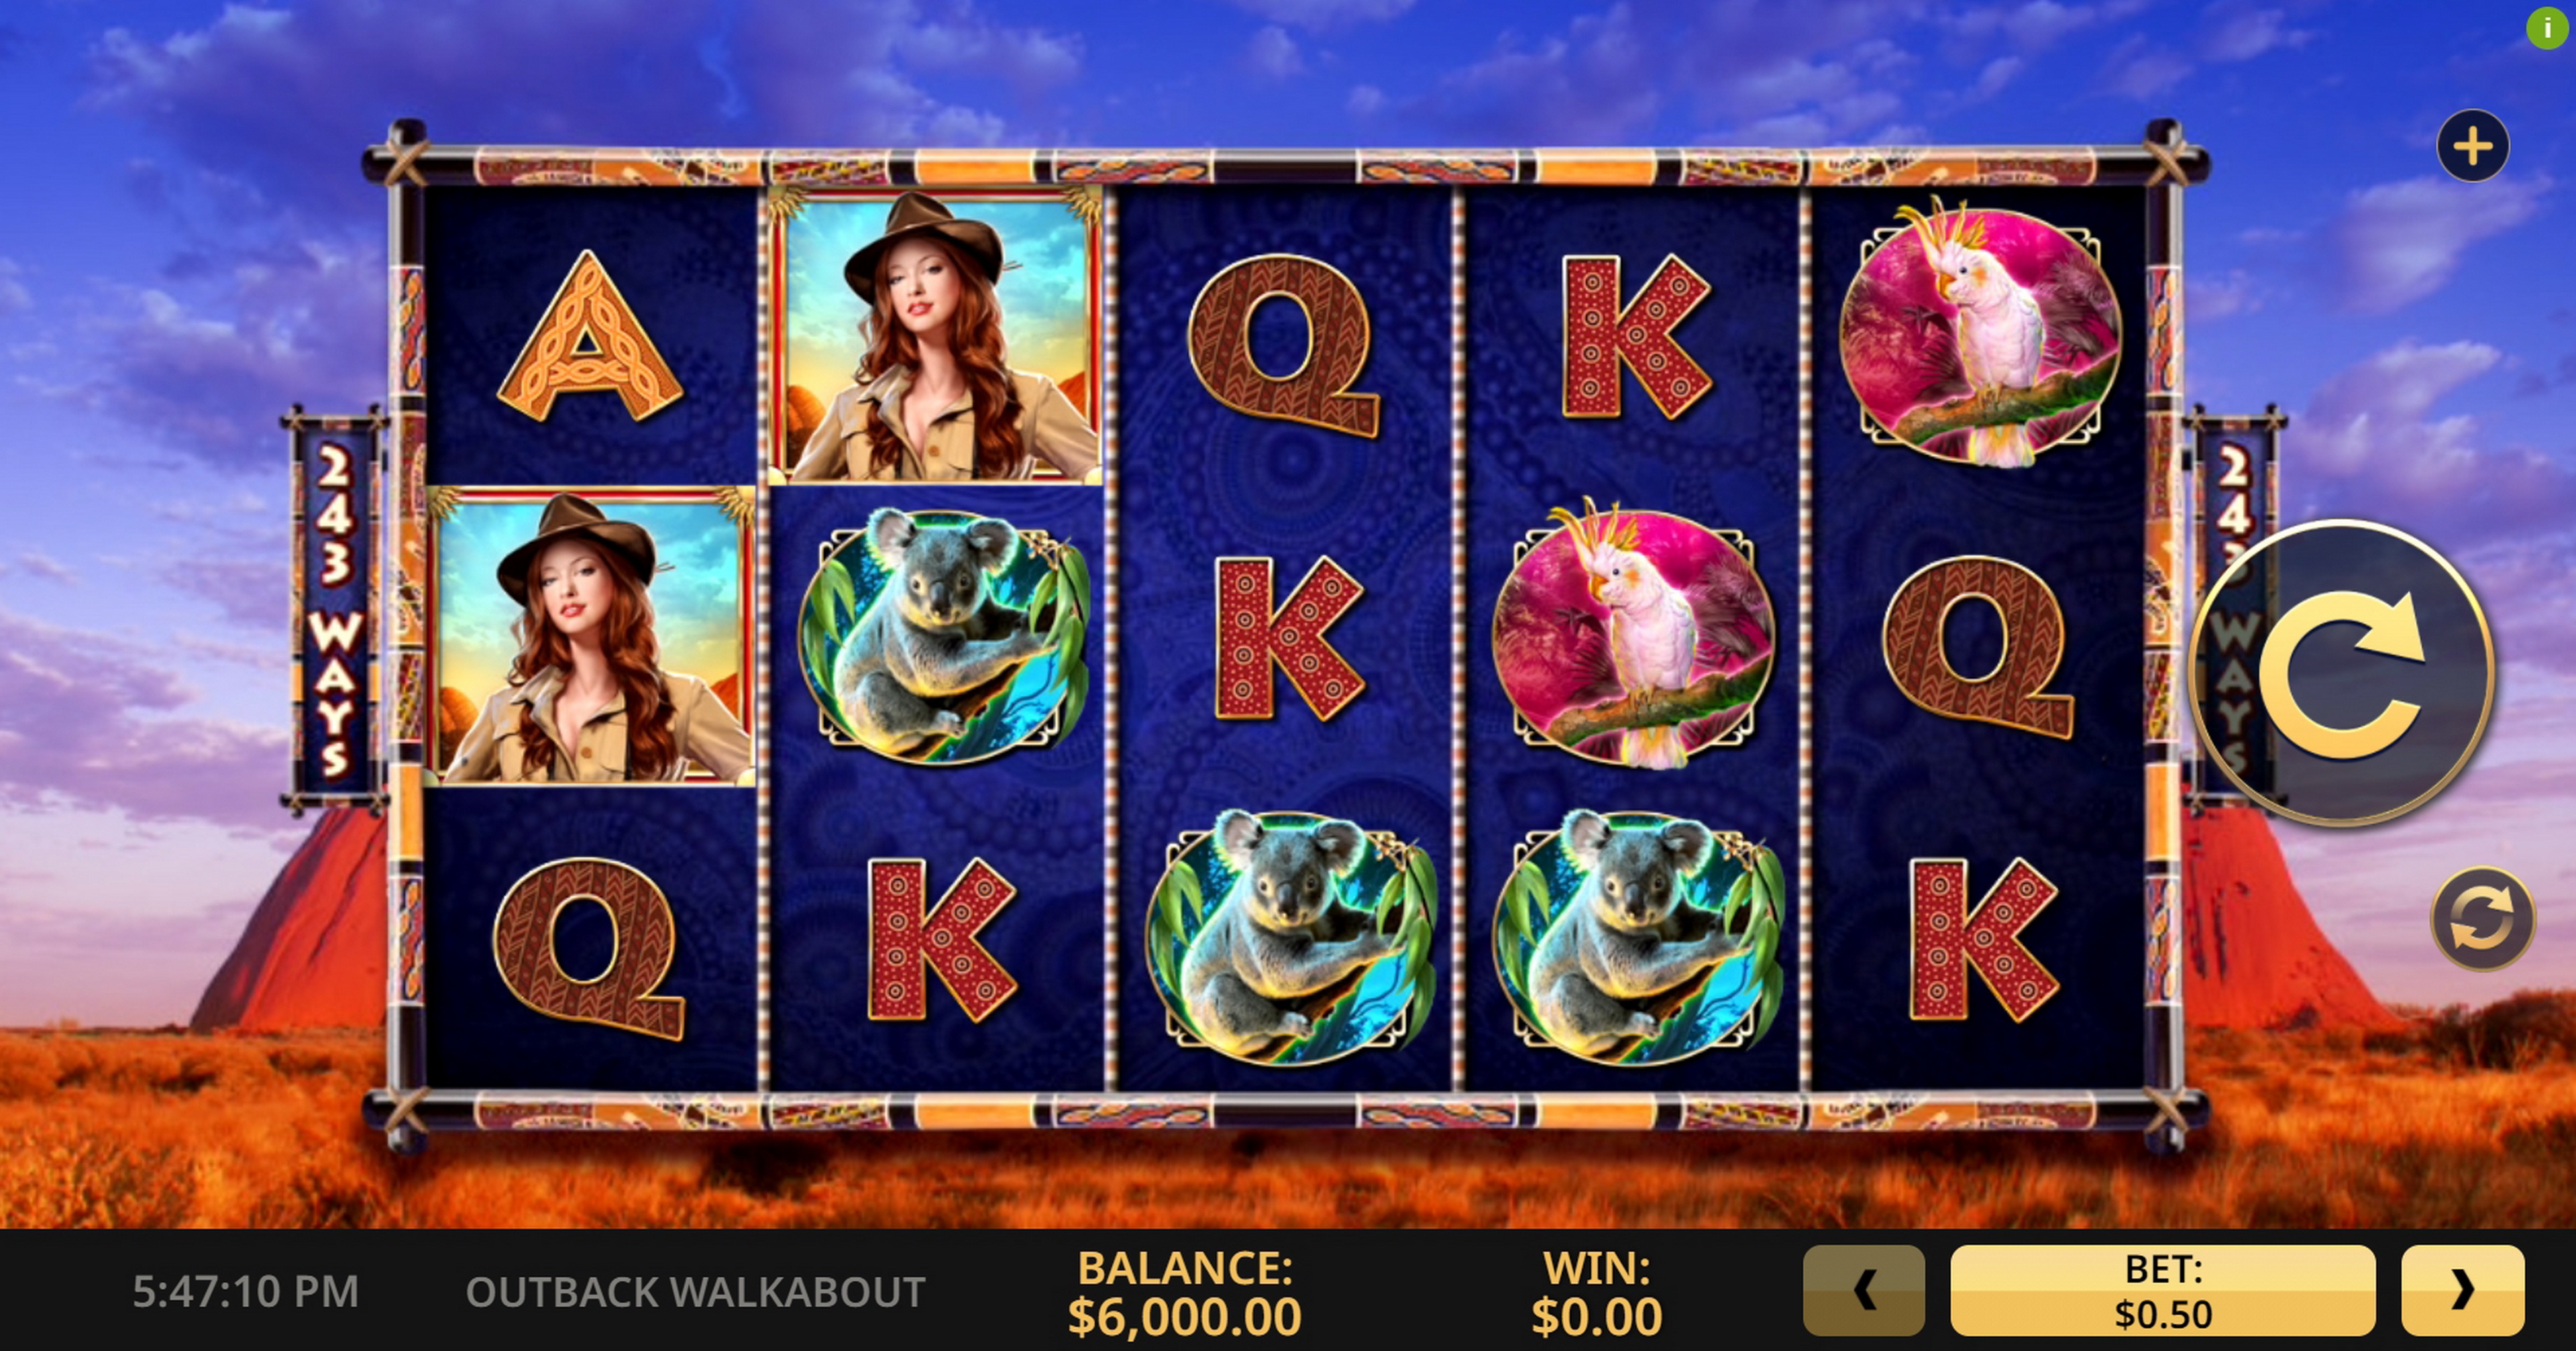 Reels in Outback Walkabout Slot Game by High 5 Games